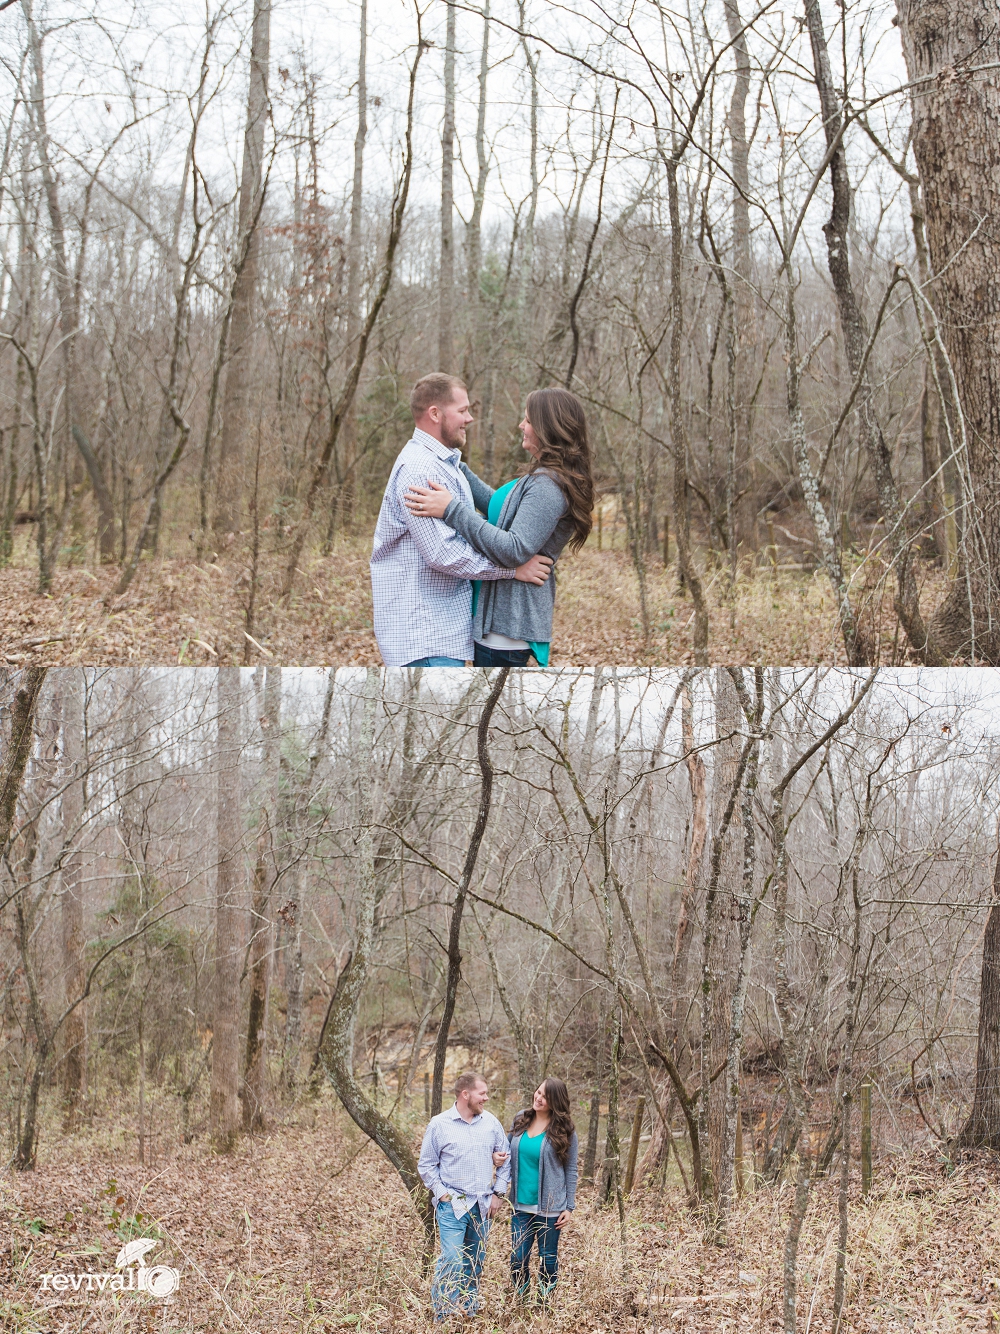 Photos by Revival Photography North Carolina Engagement Session Rustic Winter Engagement www.revivalphotography.com